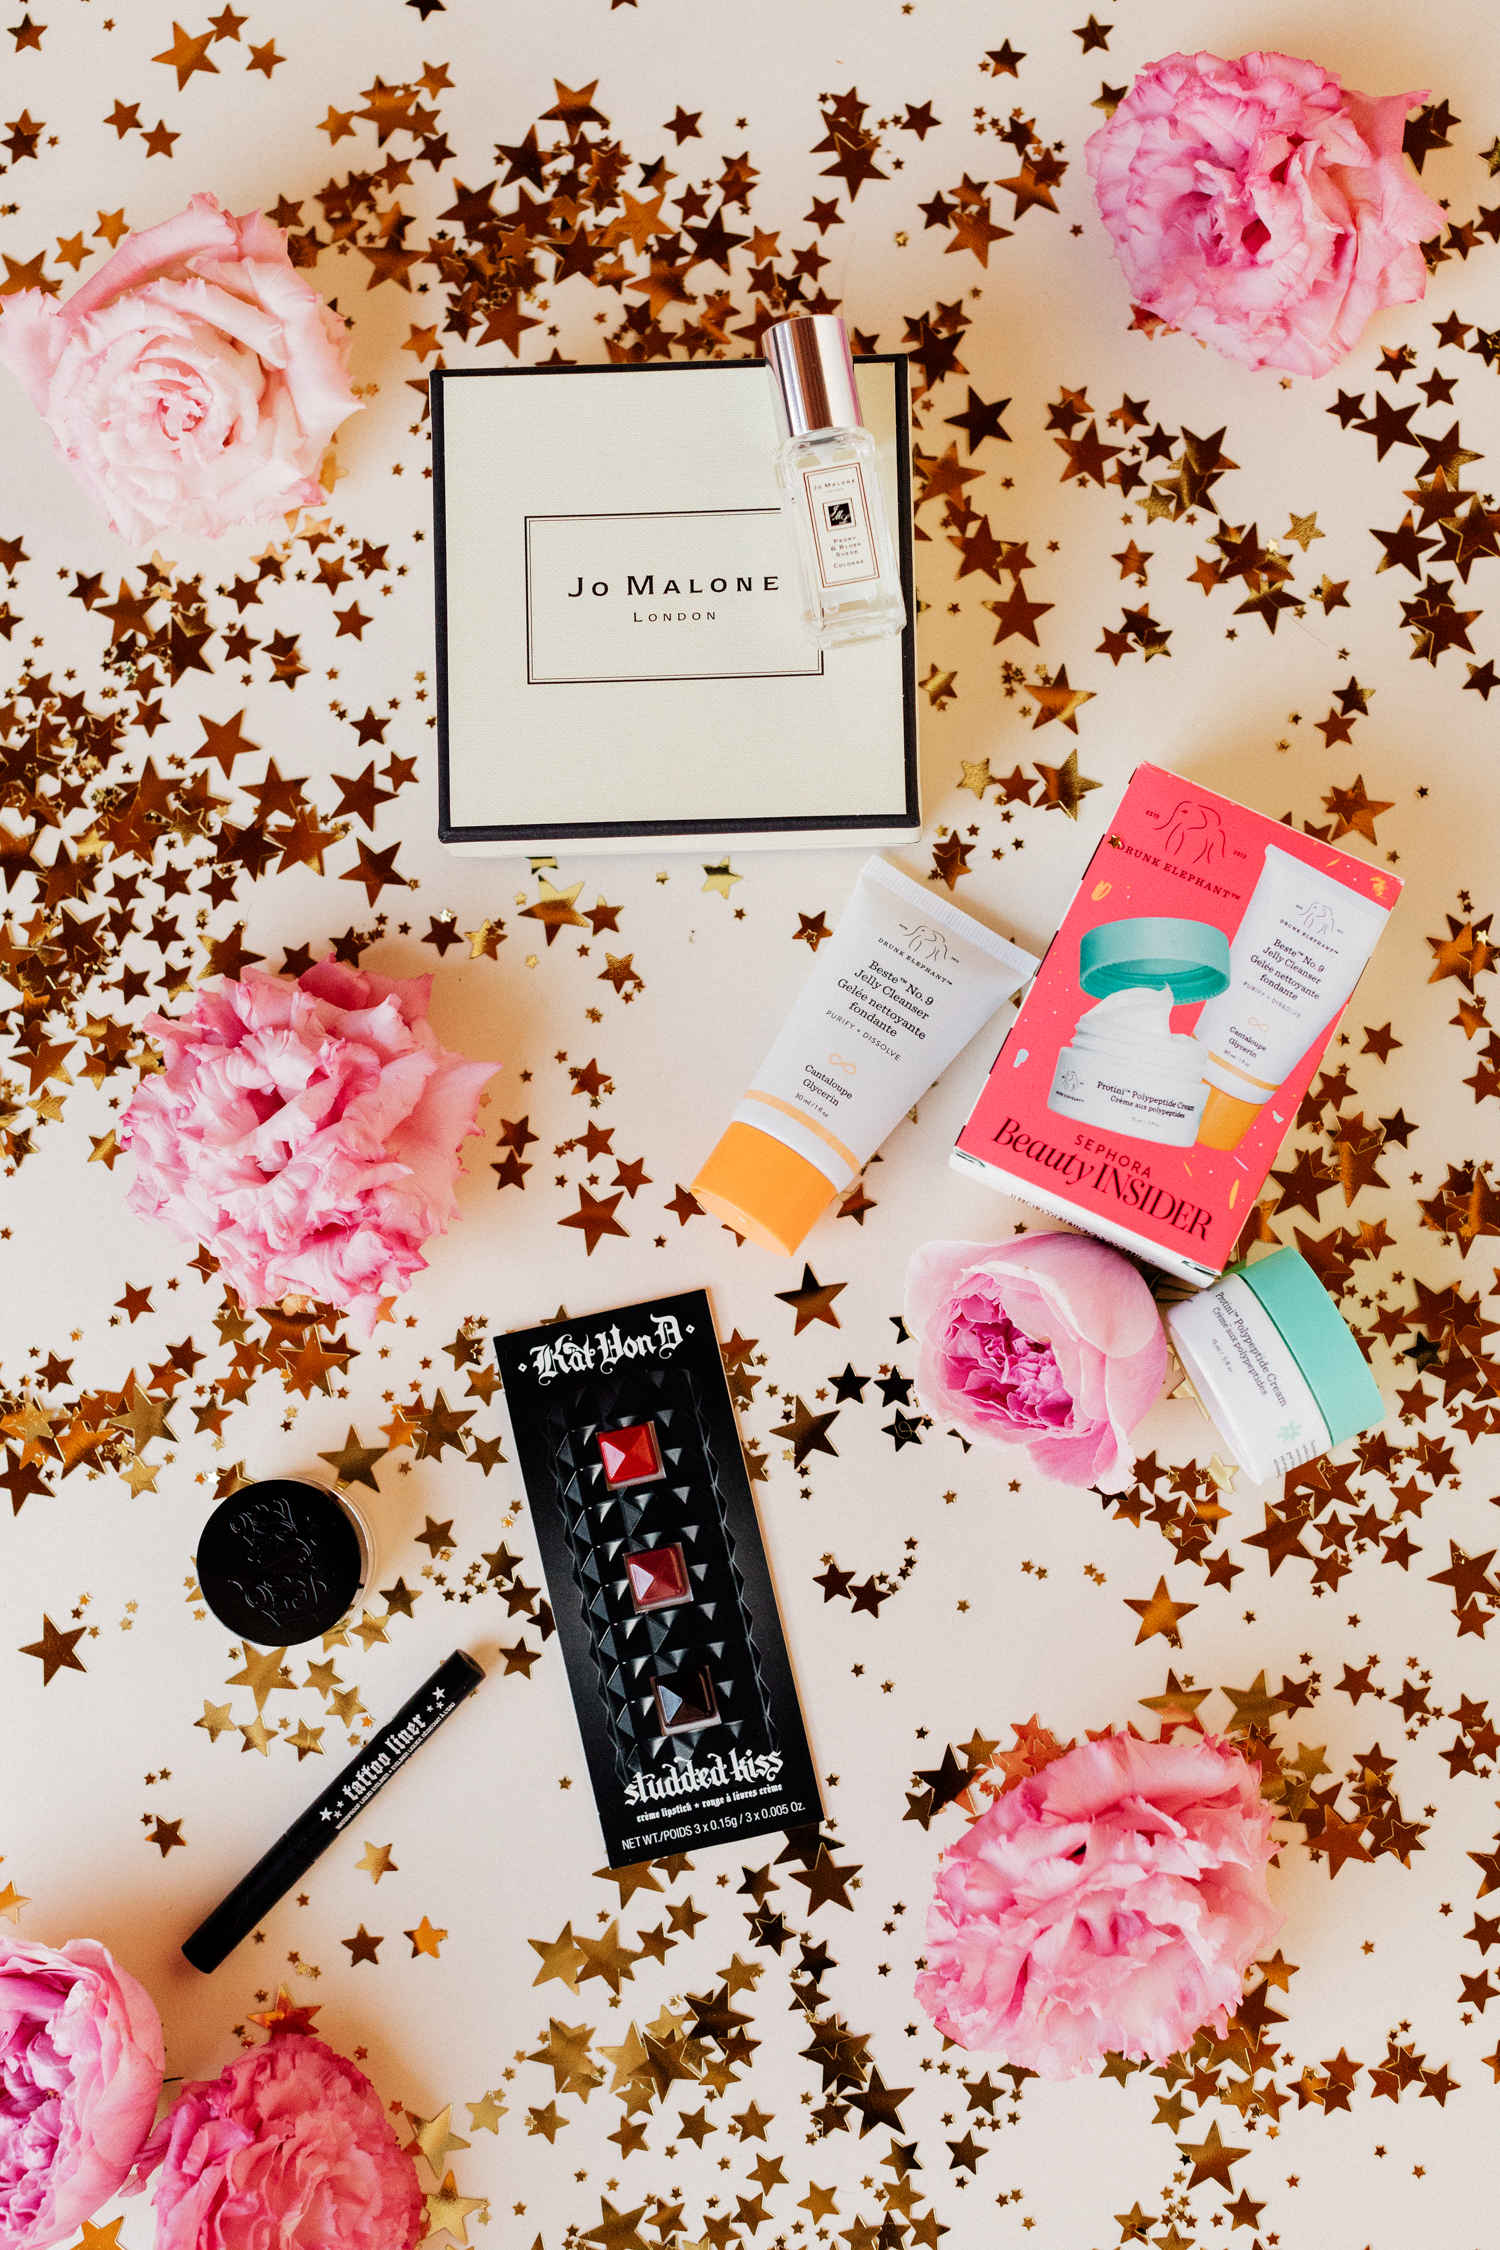 Alyssa Campanella of The A List blog spends her birthday with Sephora and their new Beauty Insiders Birthday Box